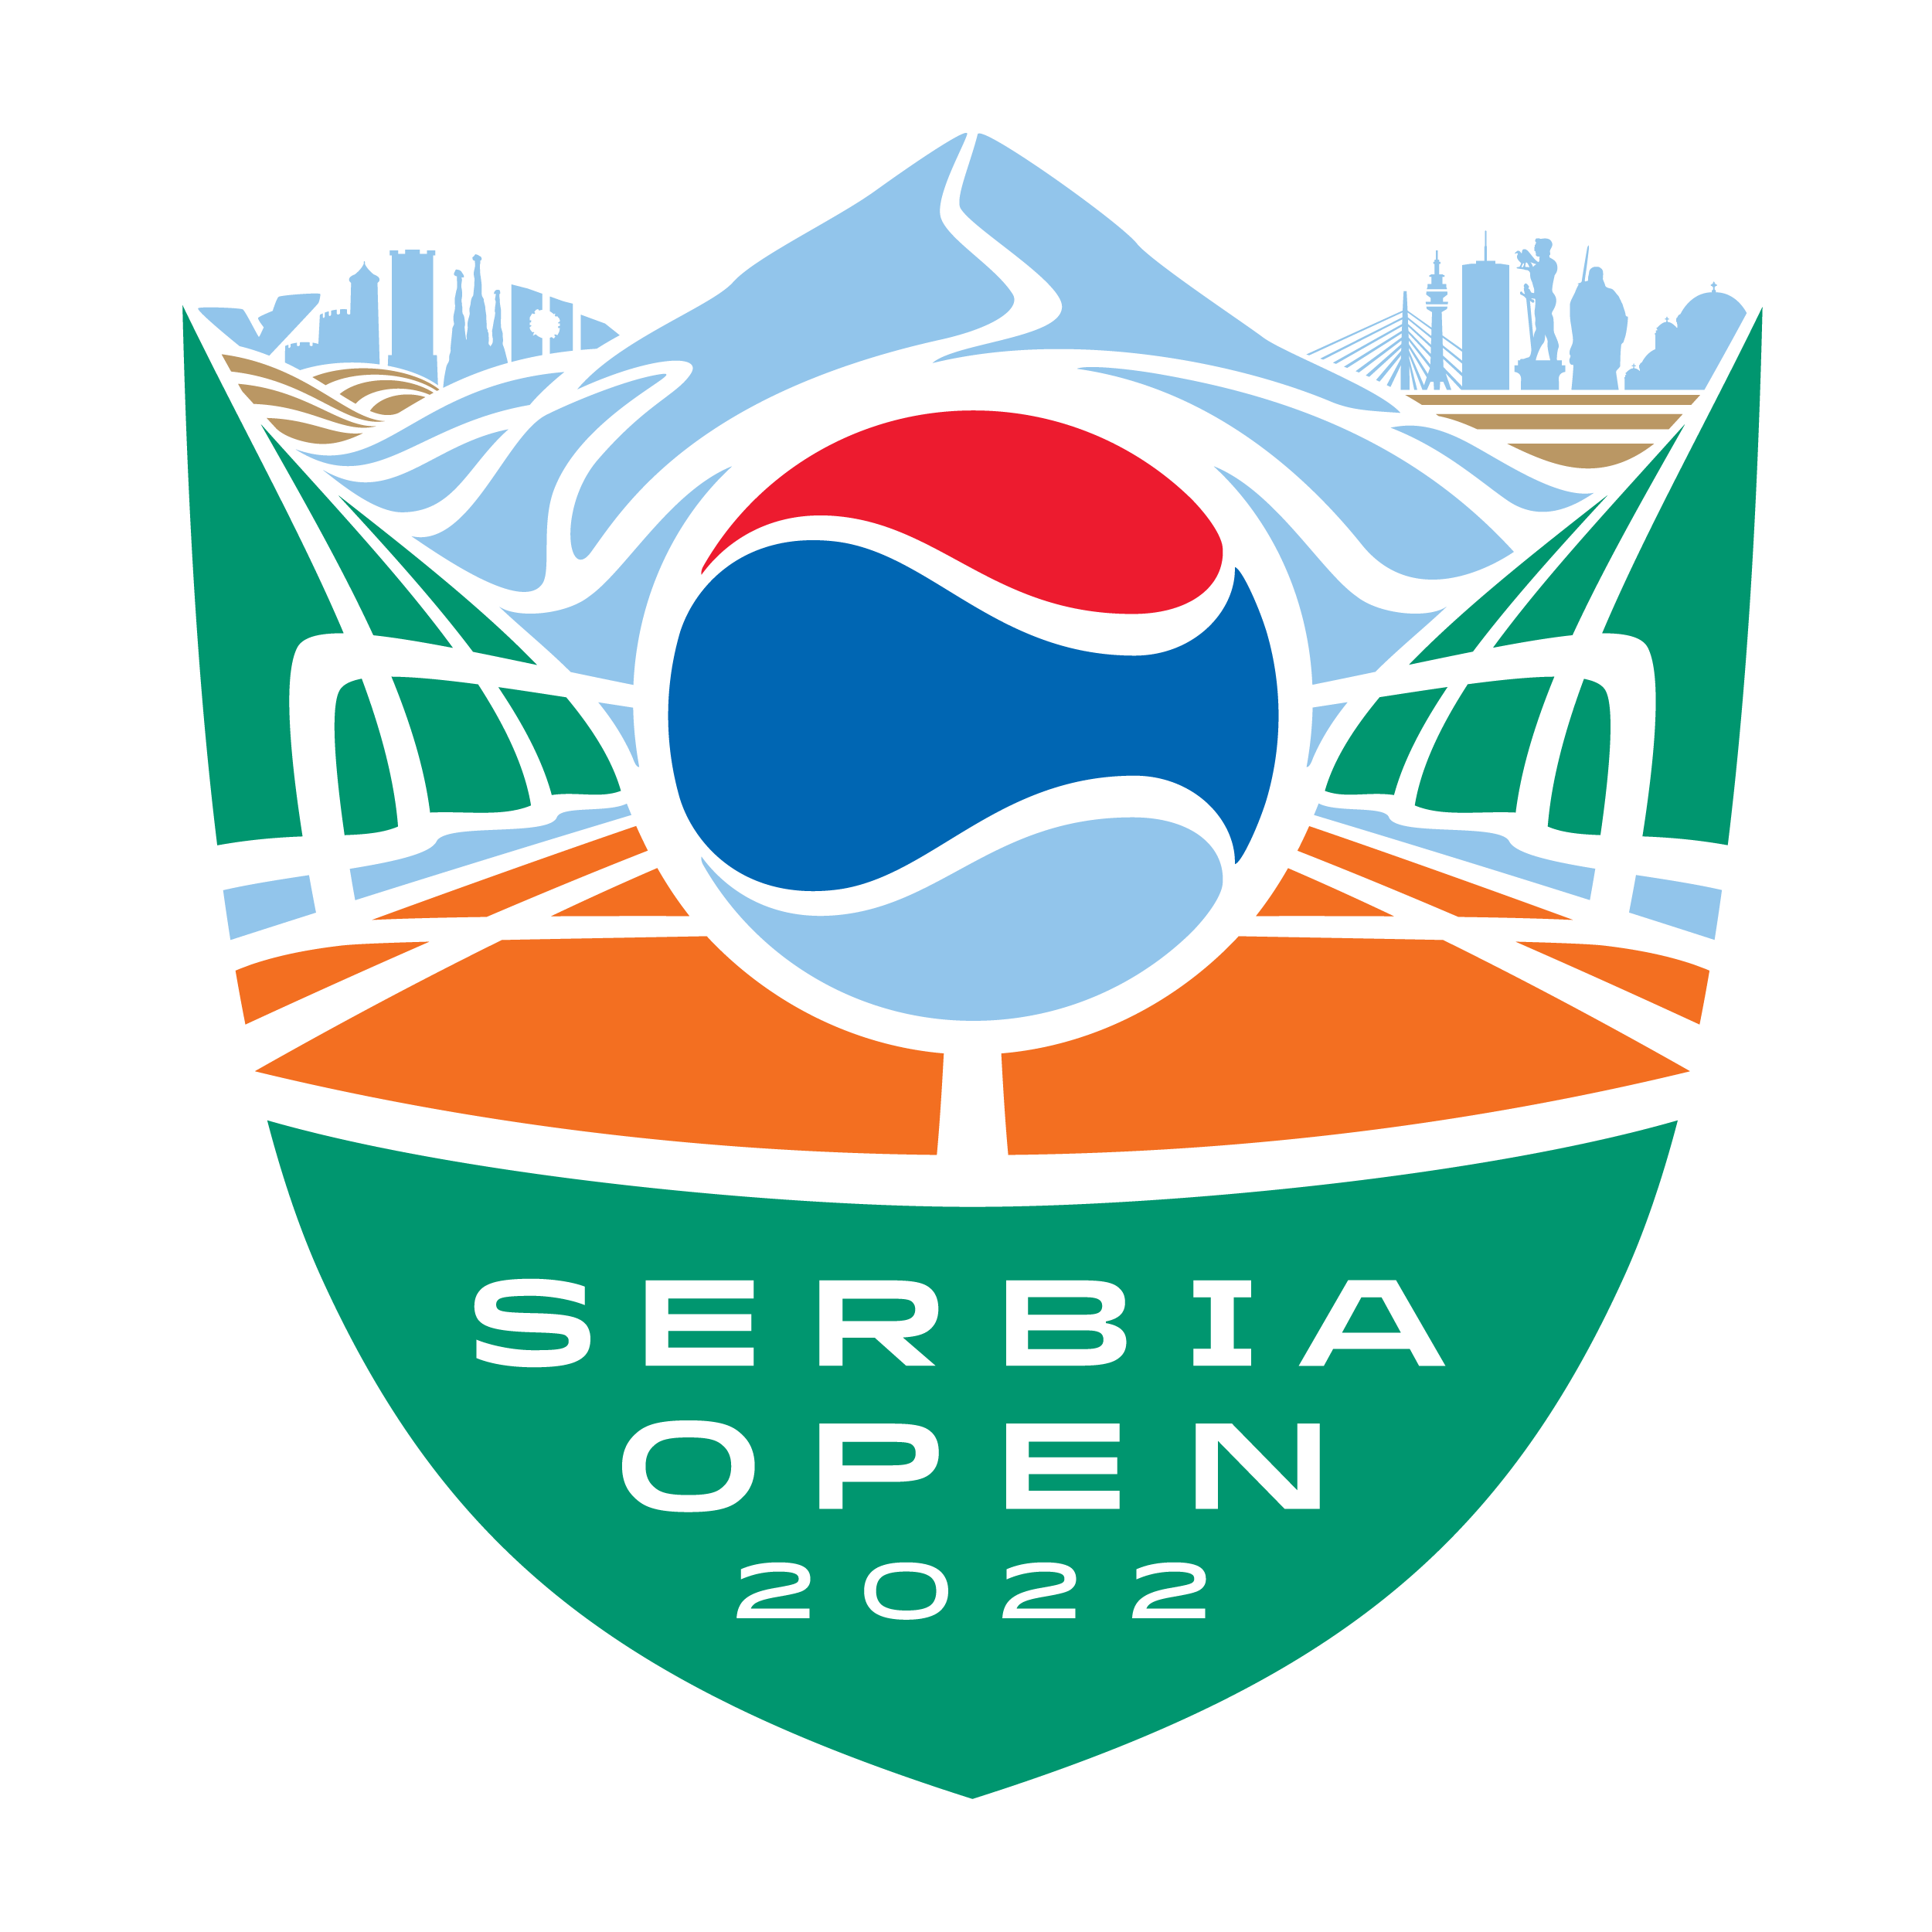 Places Serbia Open